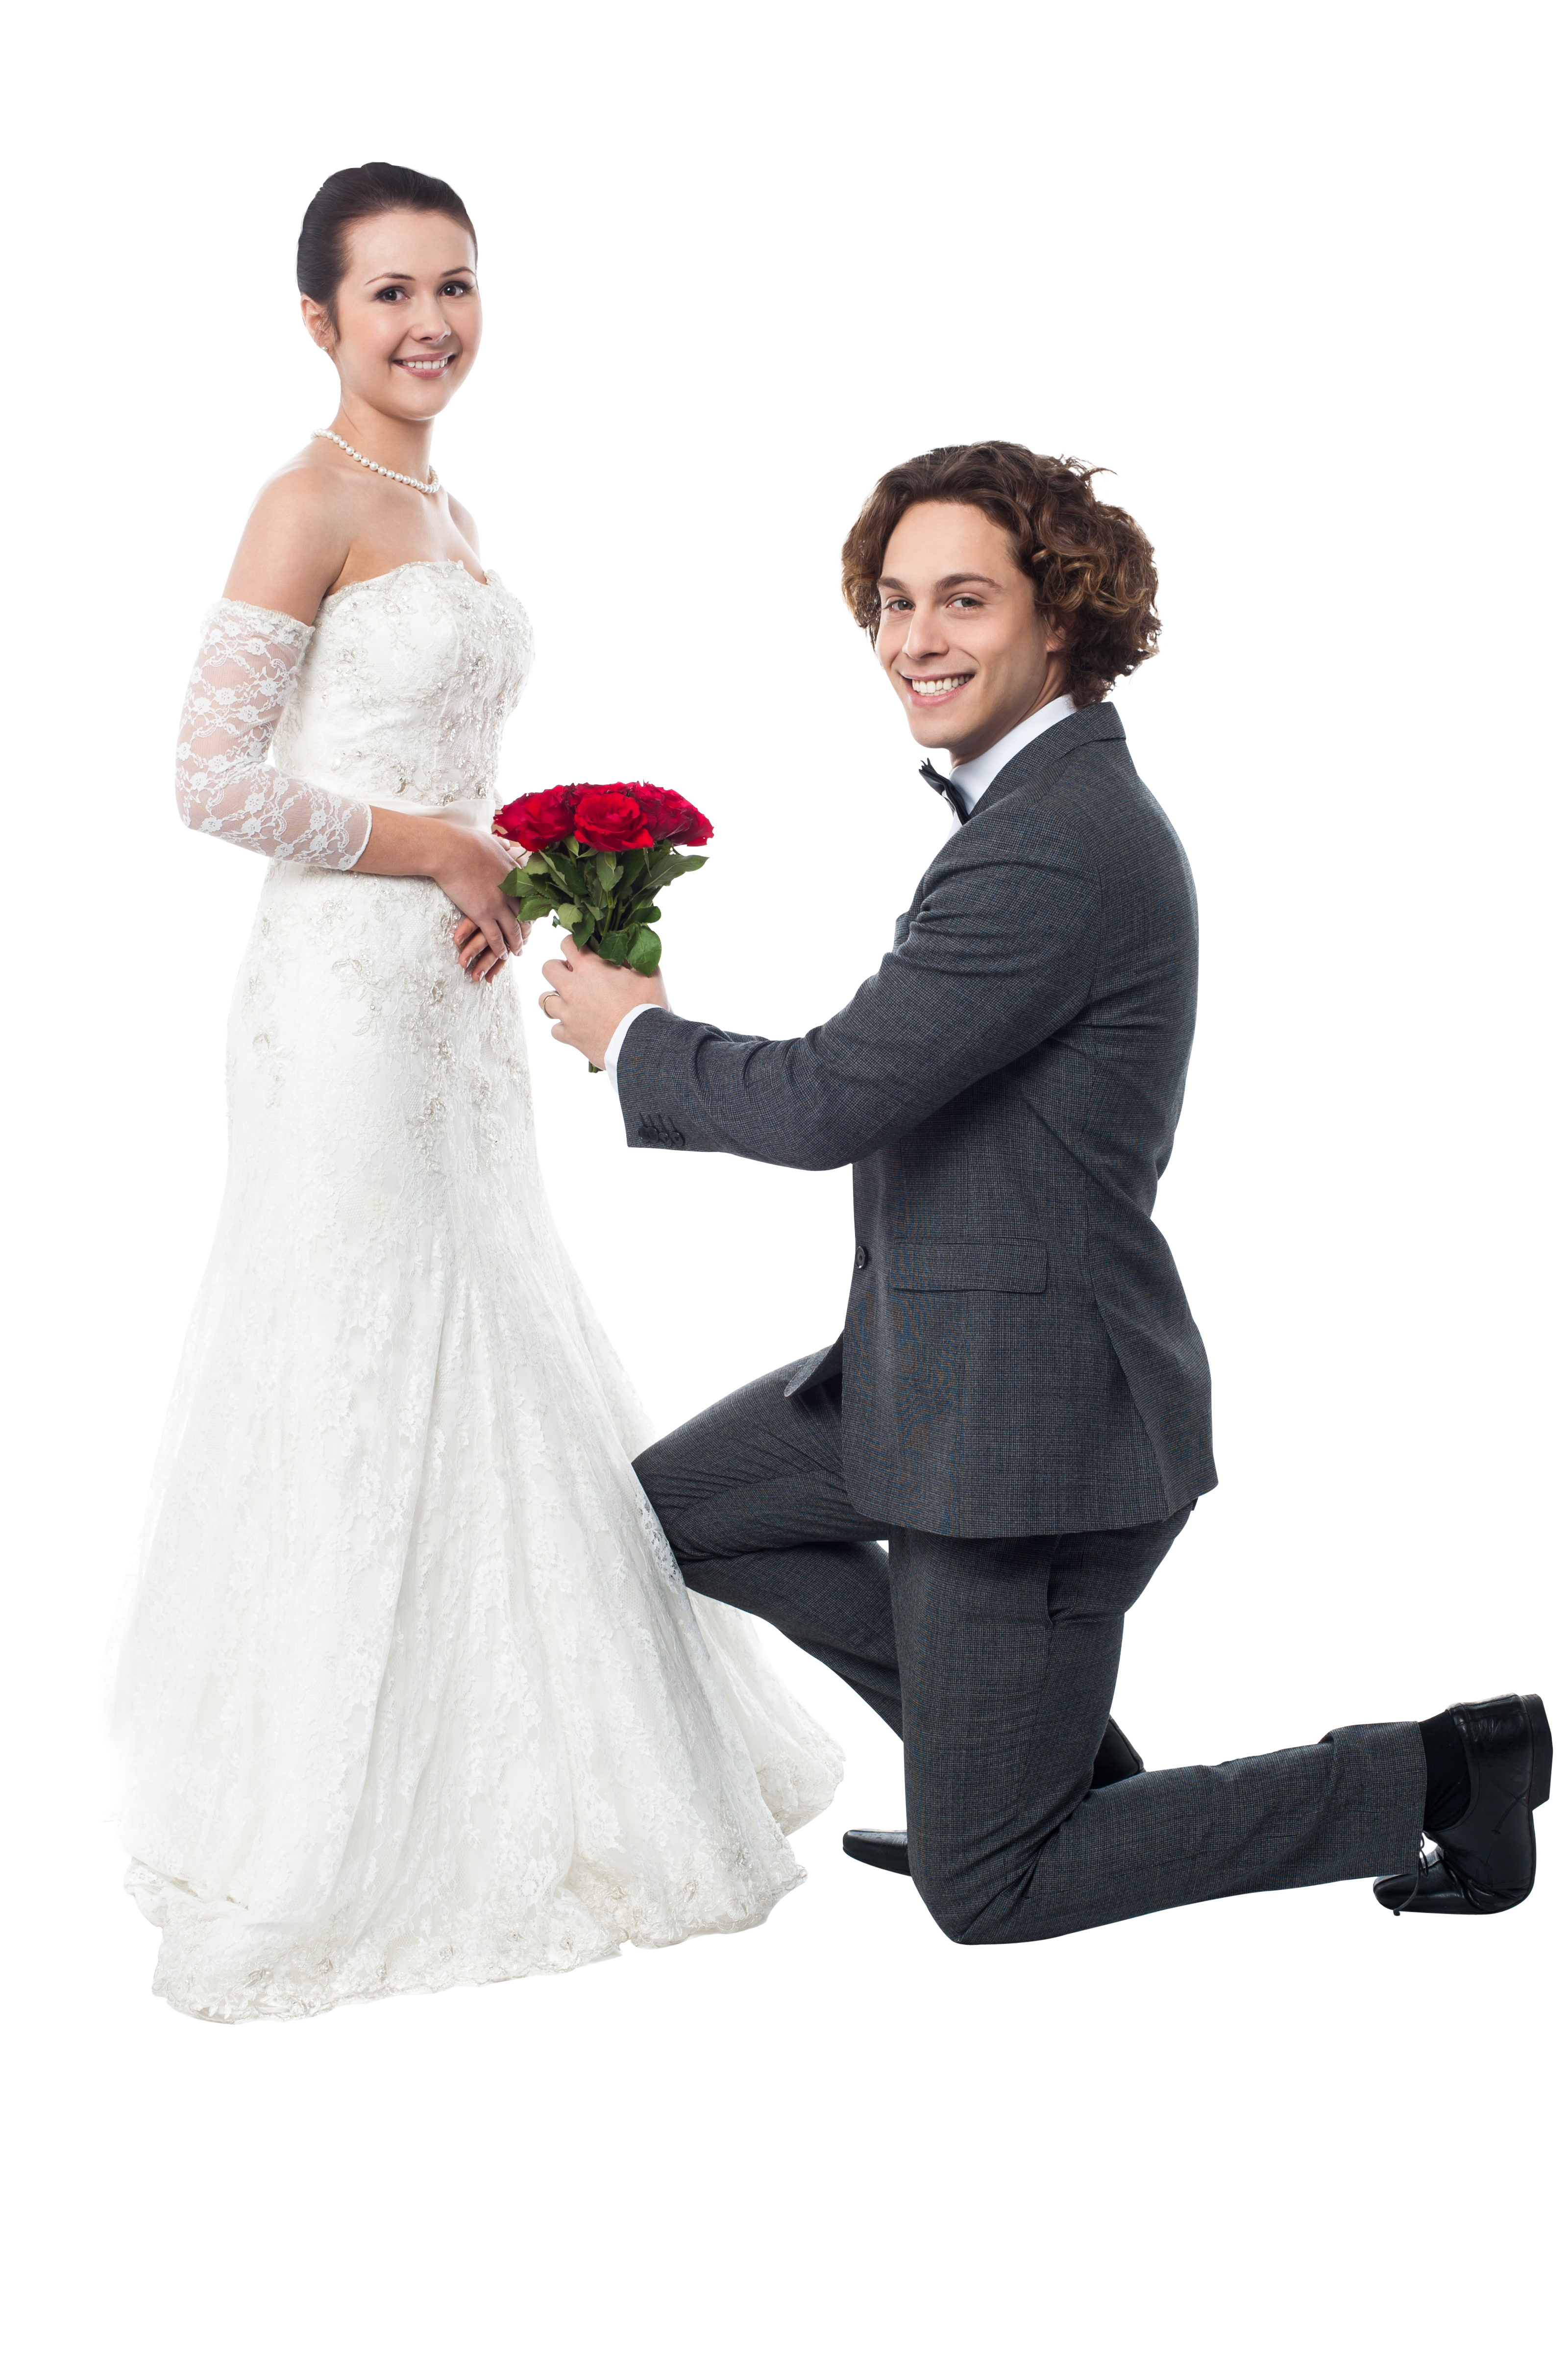 Download Wedding Couple PNG Image for Free